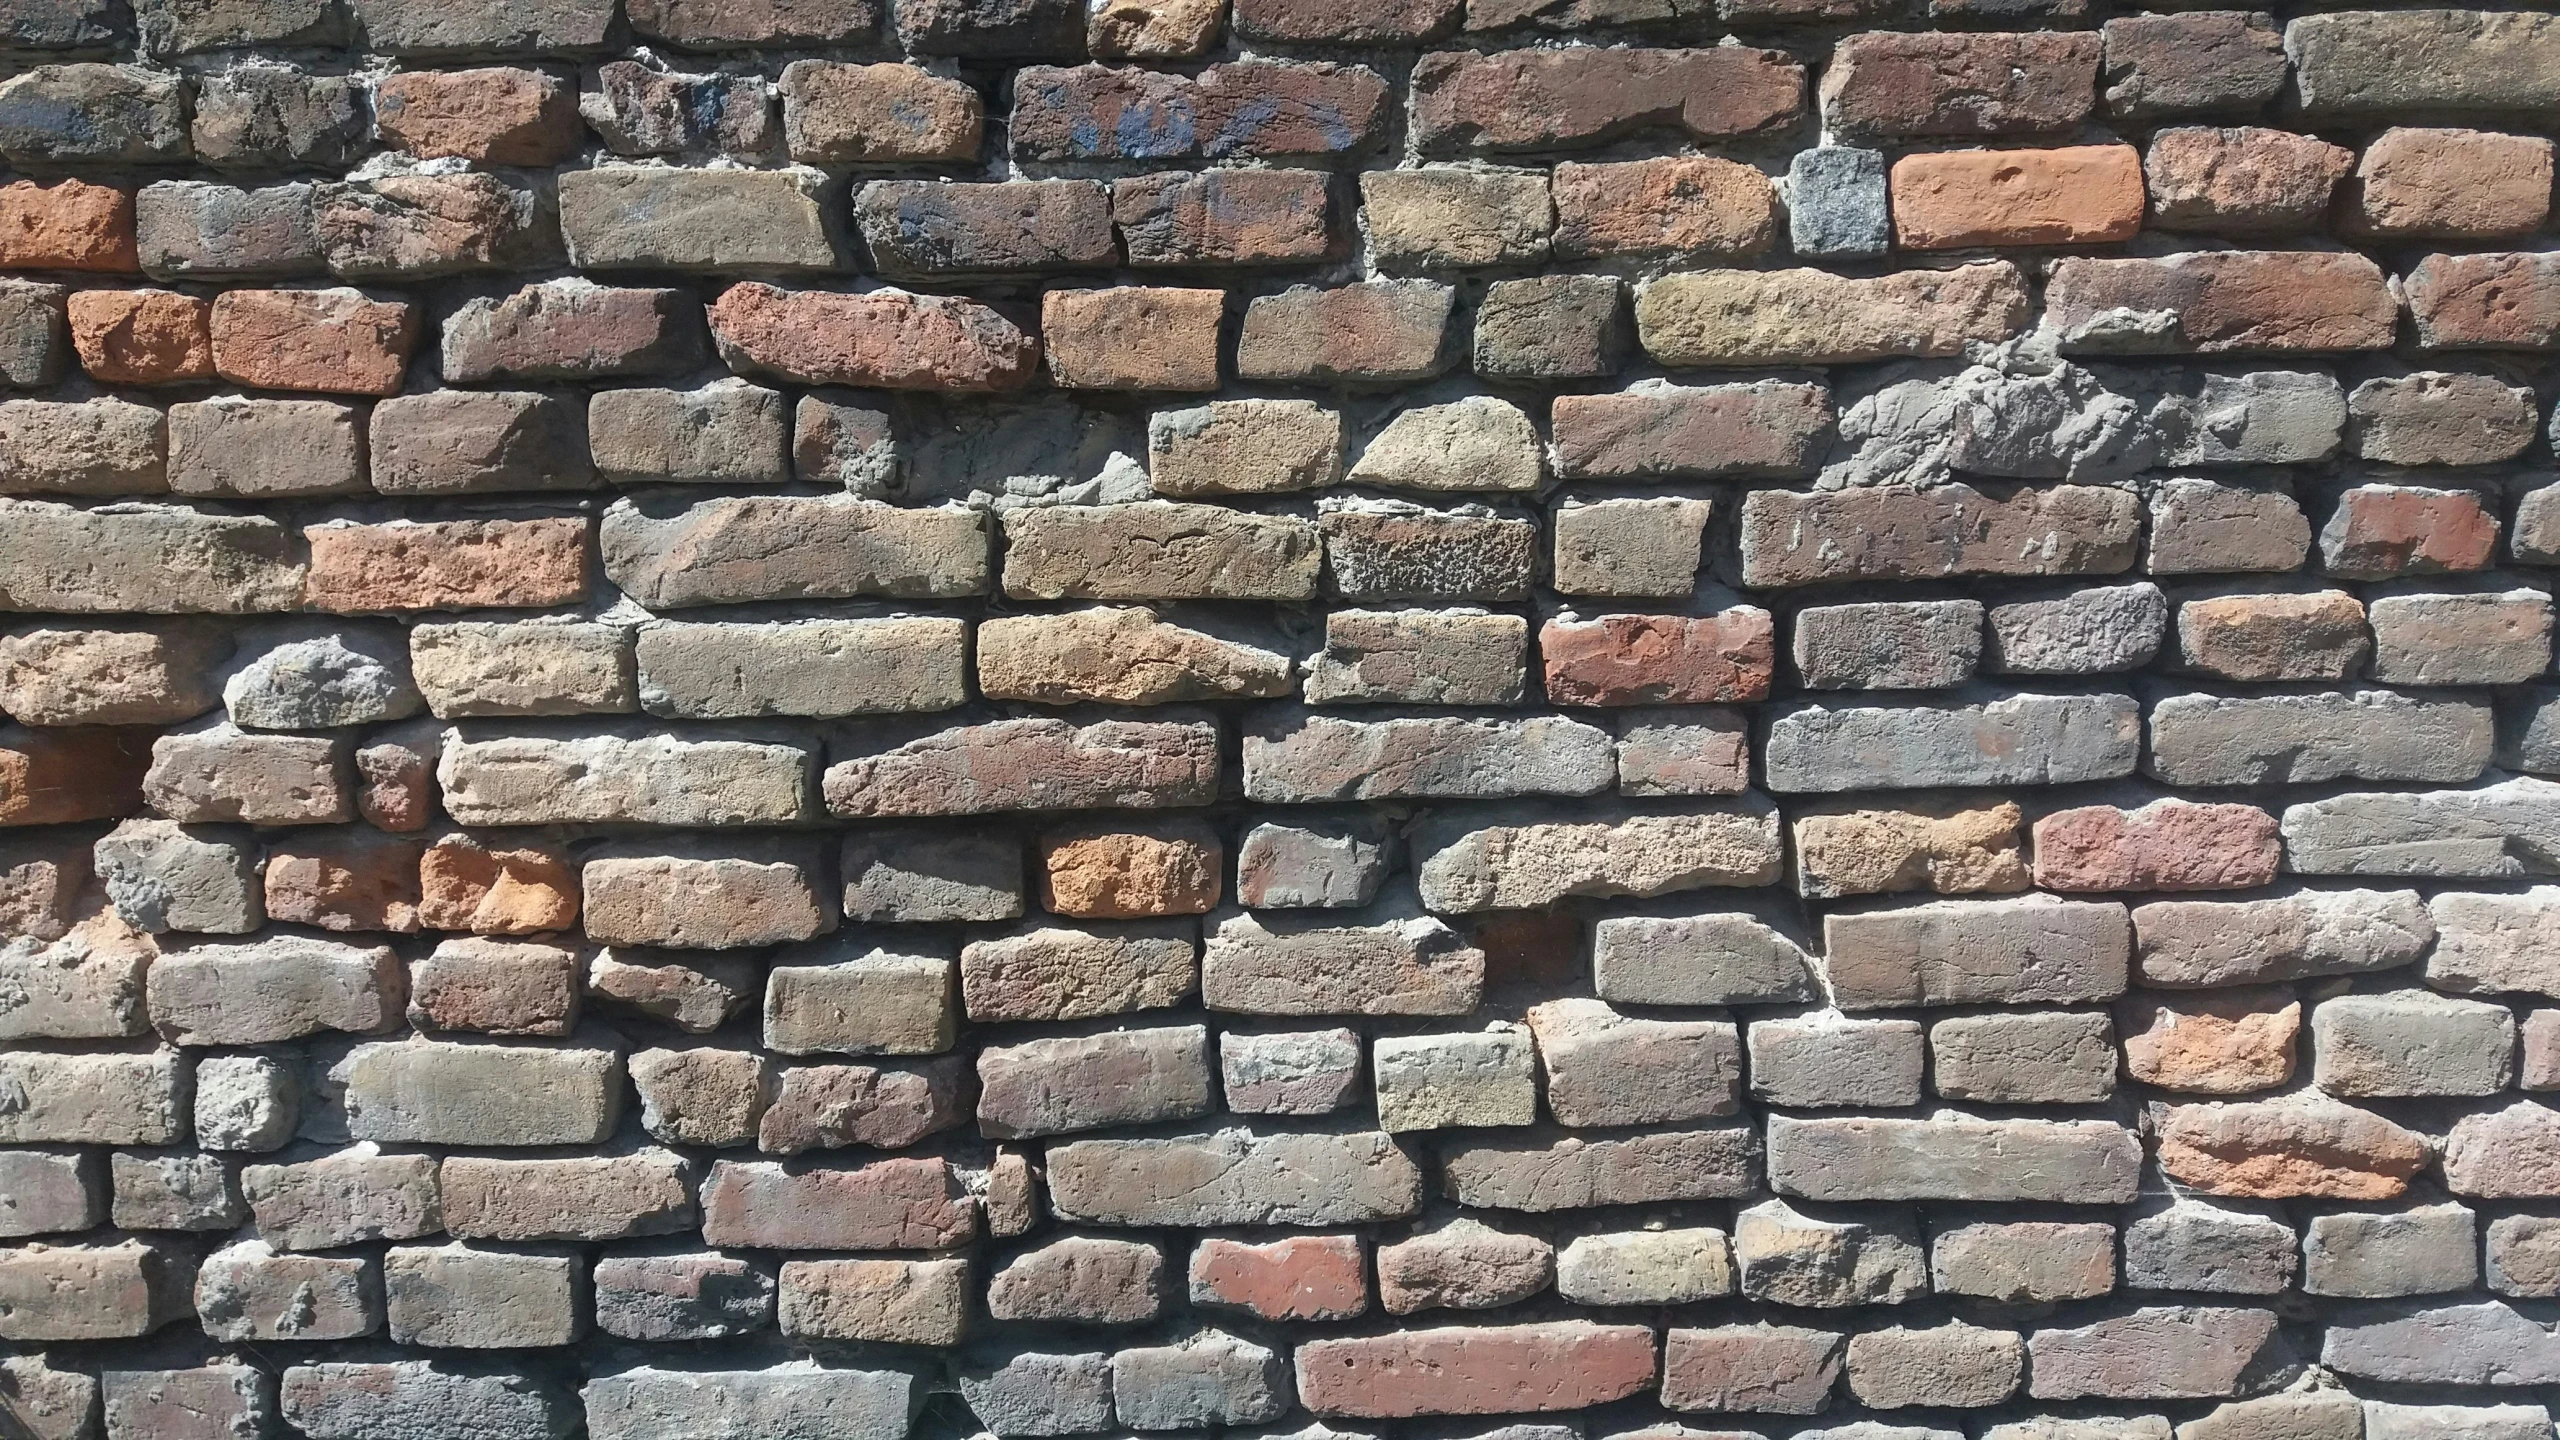 an image of a brick wall from the perspective of the camera